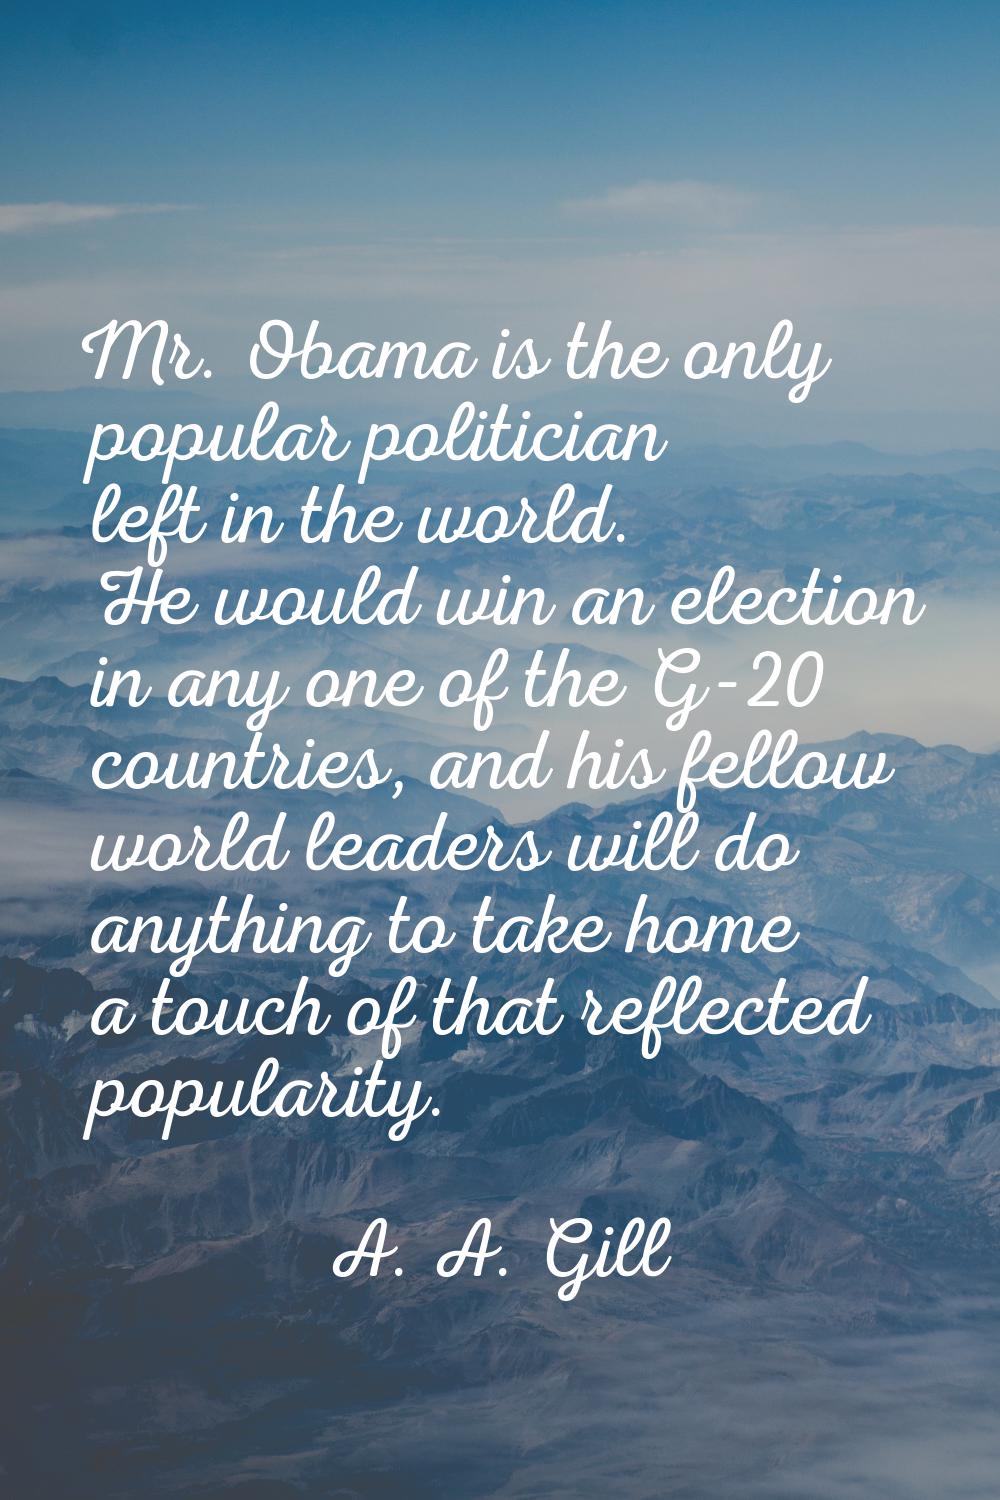 Mr. Obama is the only popular politician left in the world. He would win an election in any one of 